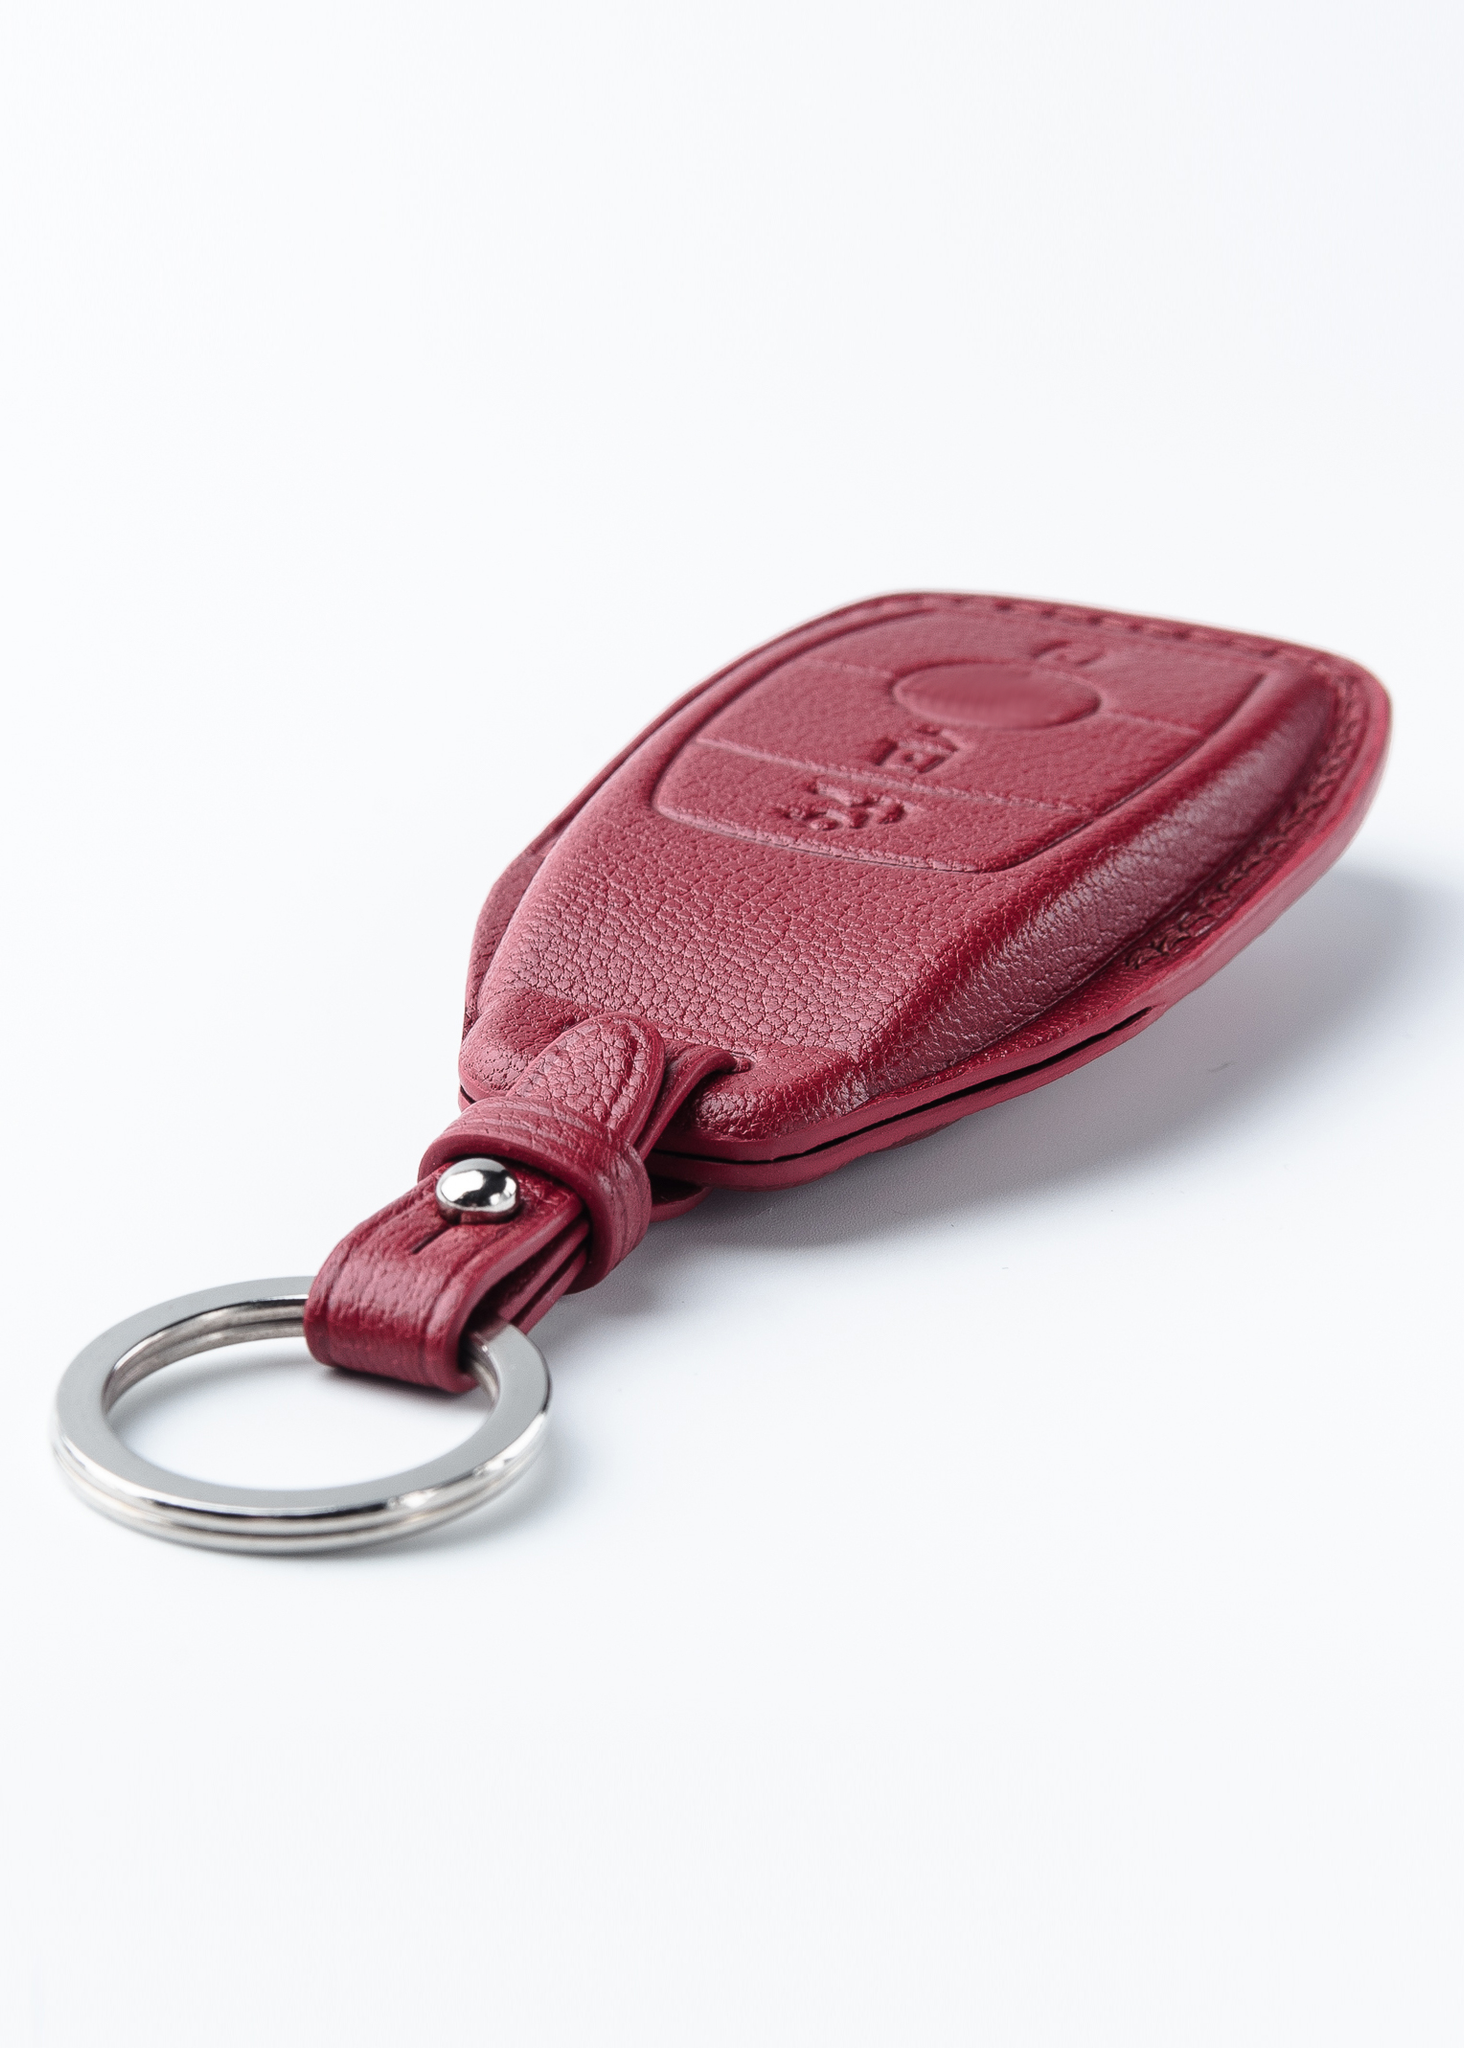 Crocodile Leather Car Key Cover for Mercedes Benz, Leather Car Key Pouch, Key  Fob Tote KC100